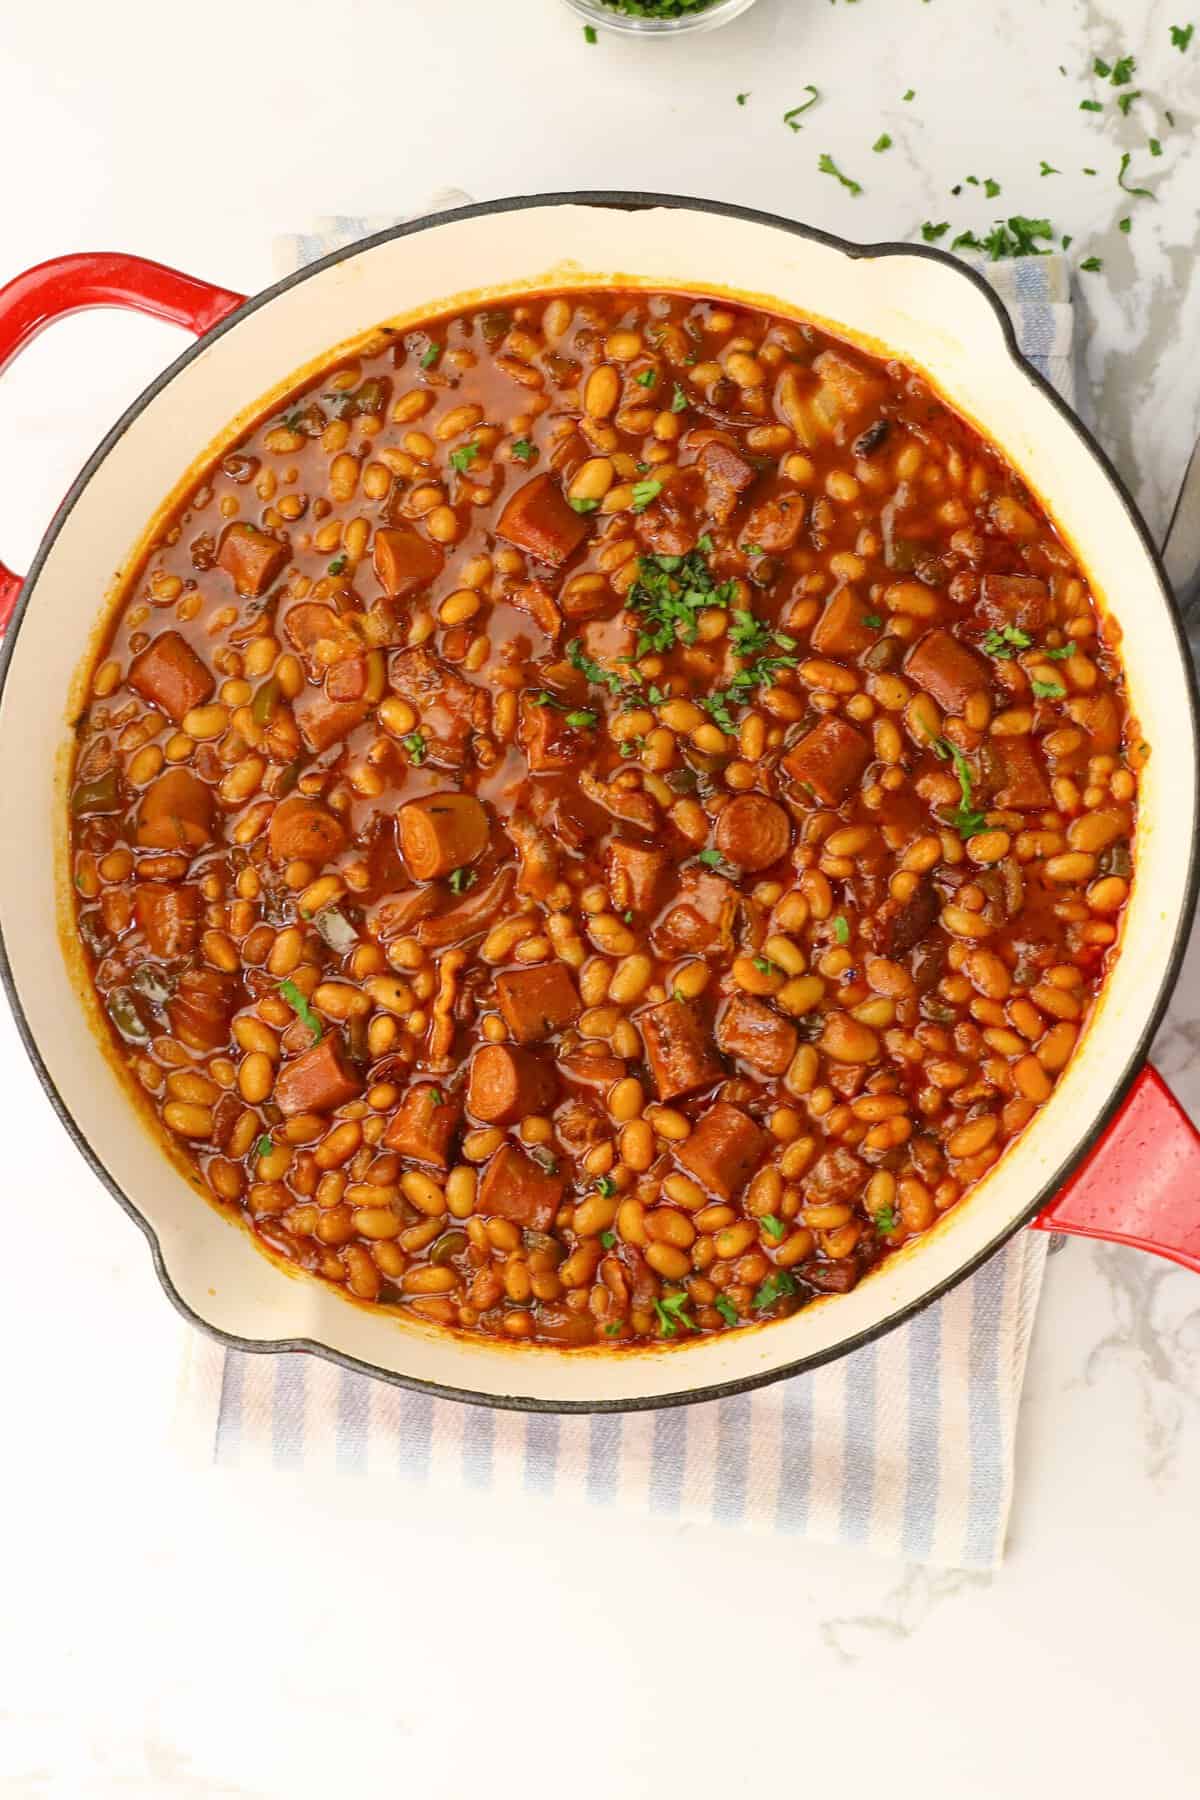 Fresh off the stove pot of frank and beans for a quick family favorite